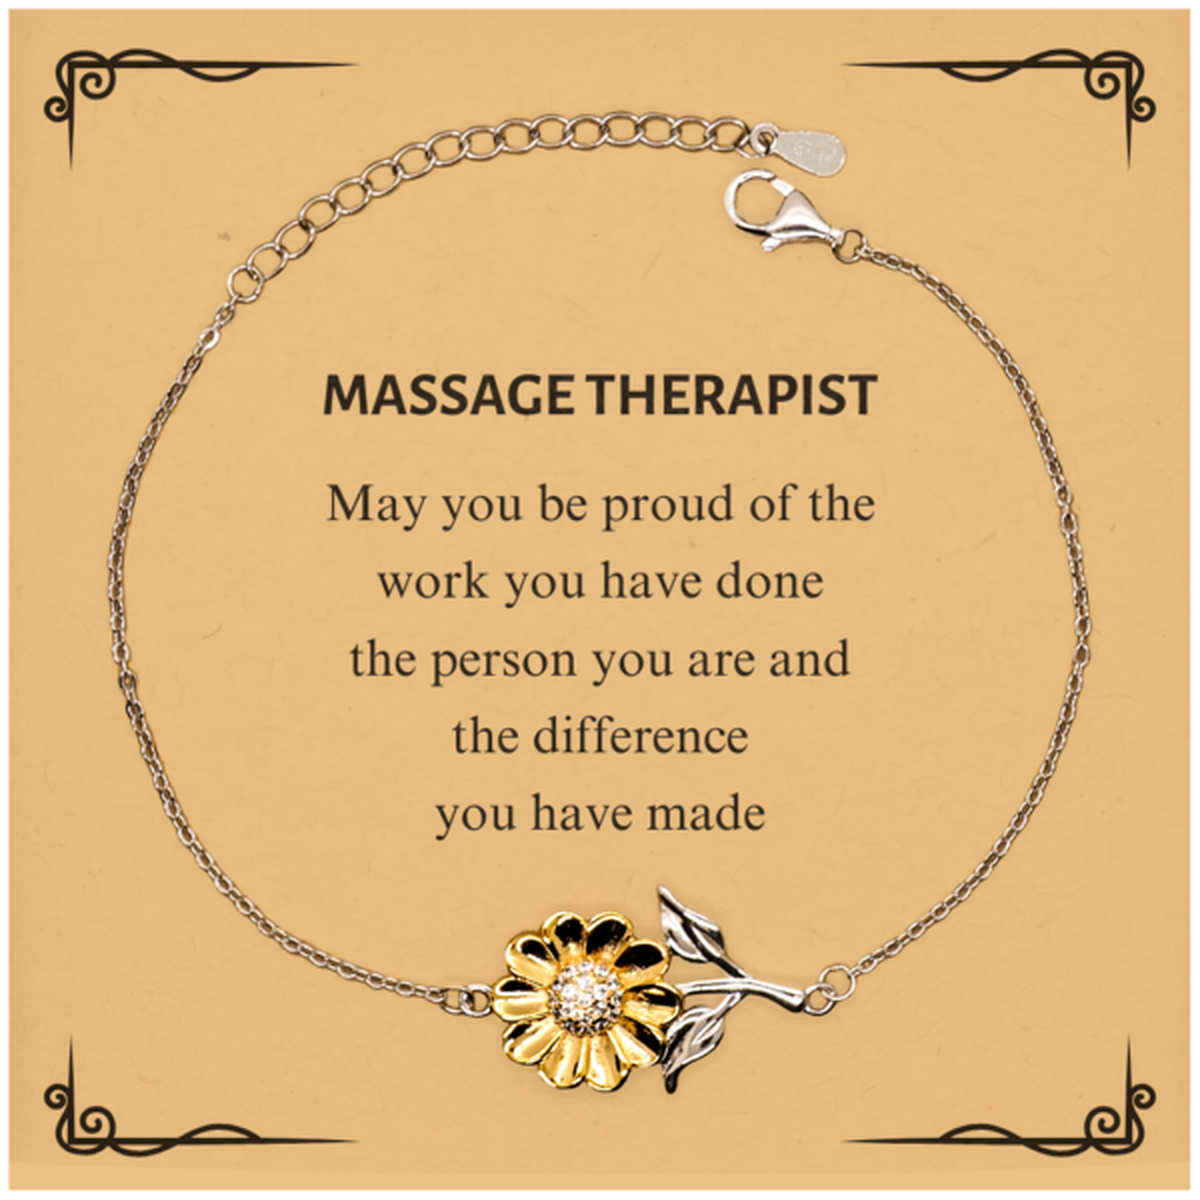 Massage Therapist May you be proud of the work you have done, Retirement Massage Therapist Sunflower Bracelet for Colleague Appreciation Gifts Amazing for Massage Therapist